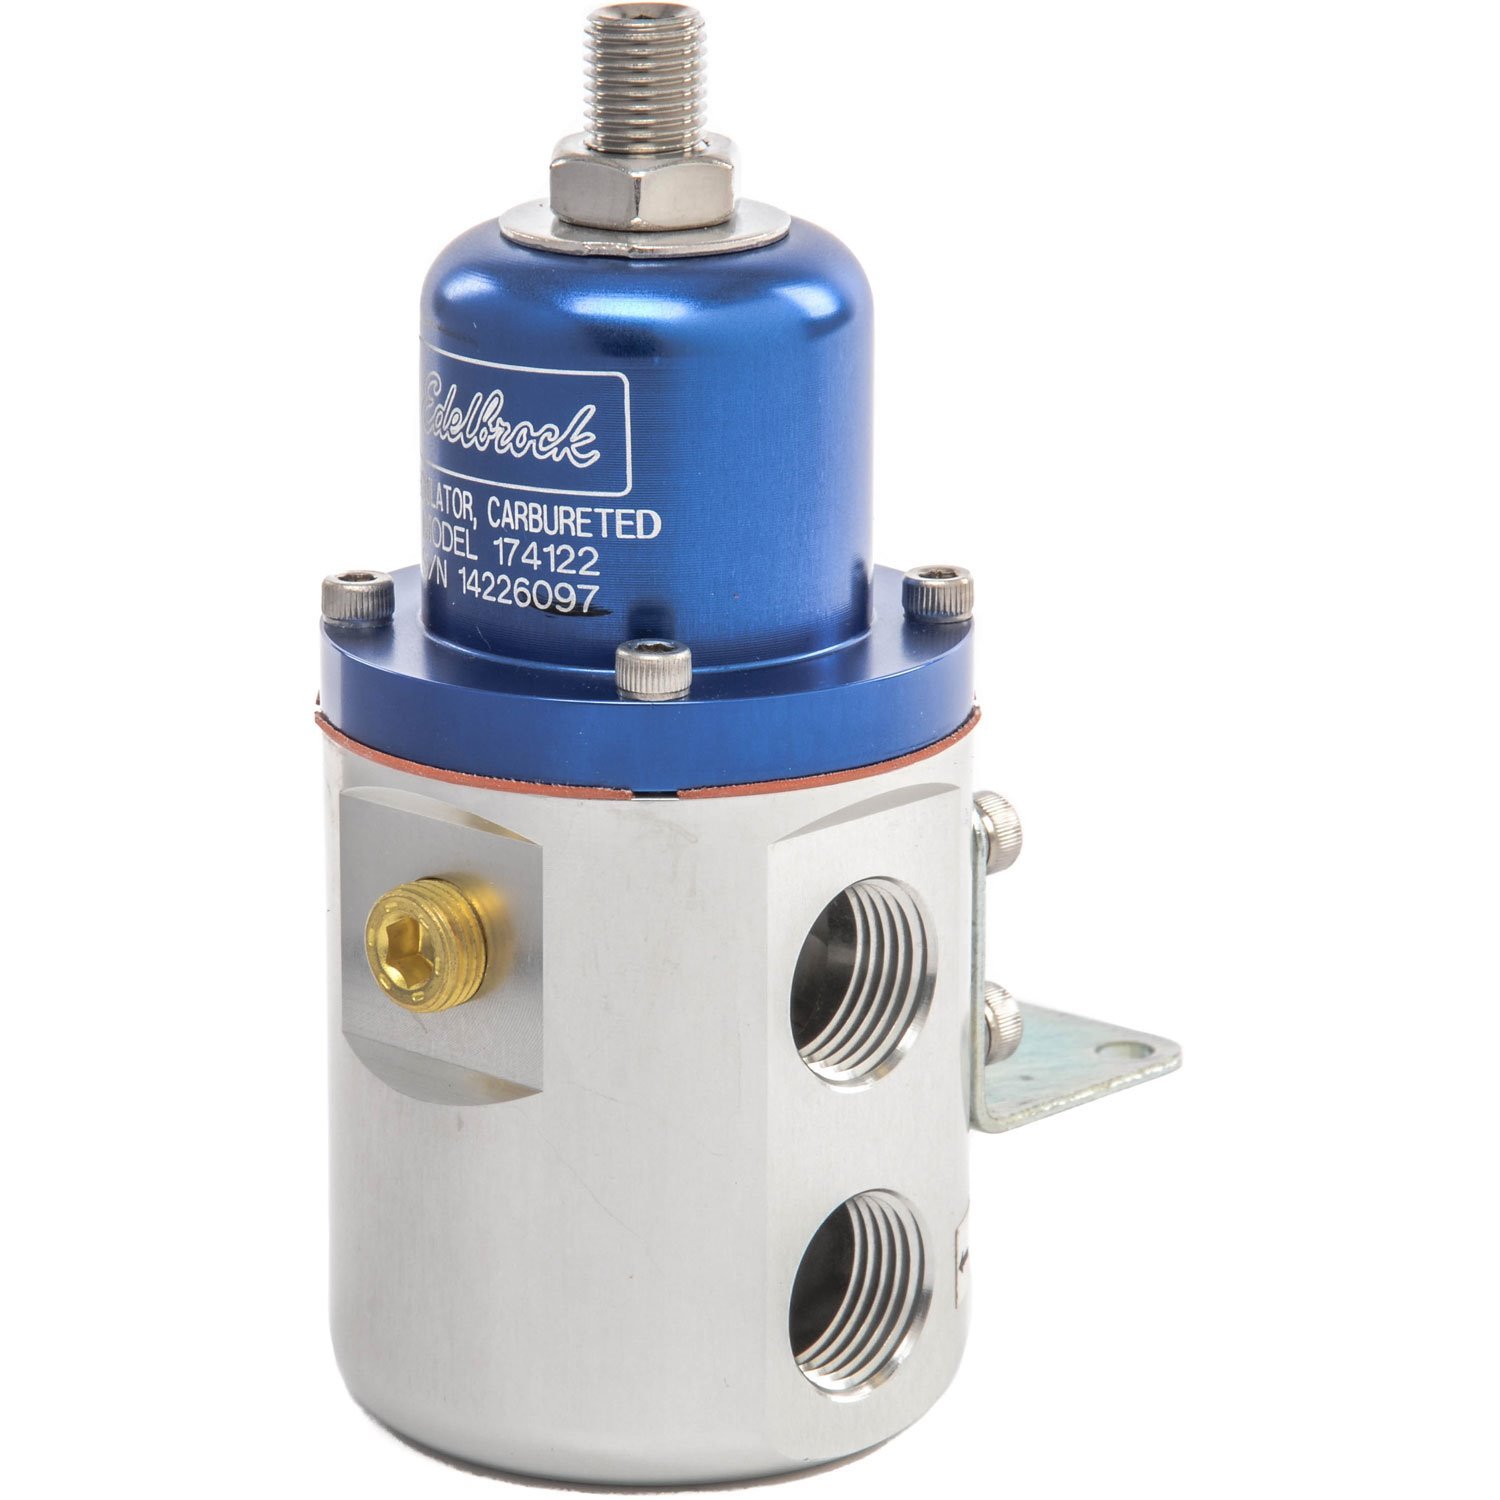 Carbureted Adjustable Non-Bypass Fuel Pressure Regulator 160 GPH with 3/8" NPT Inlet/Outlet in Blue Finish